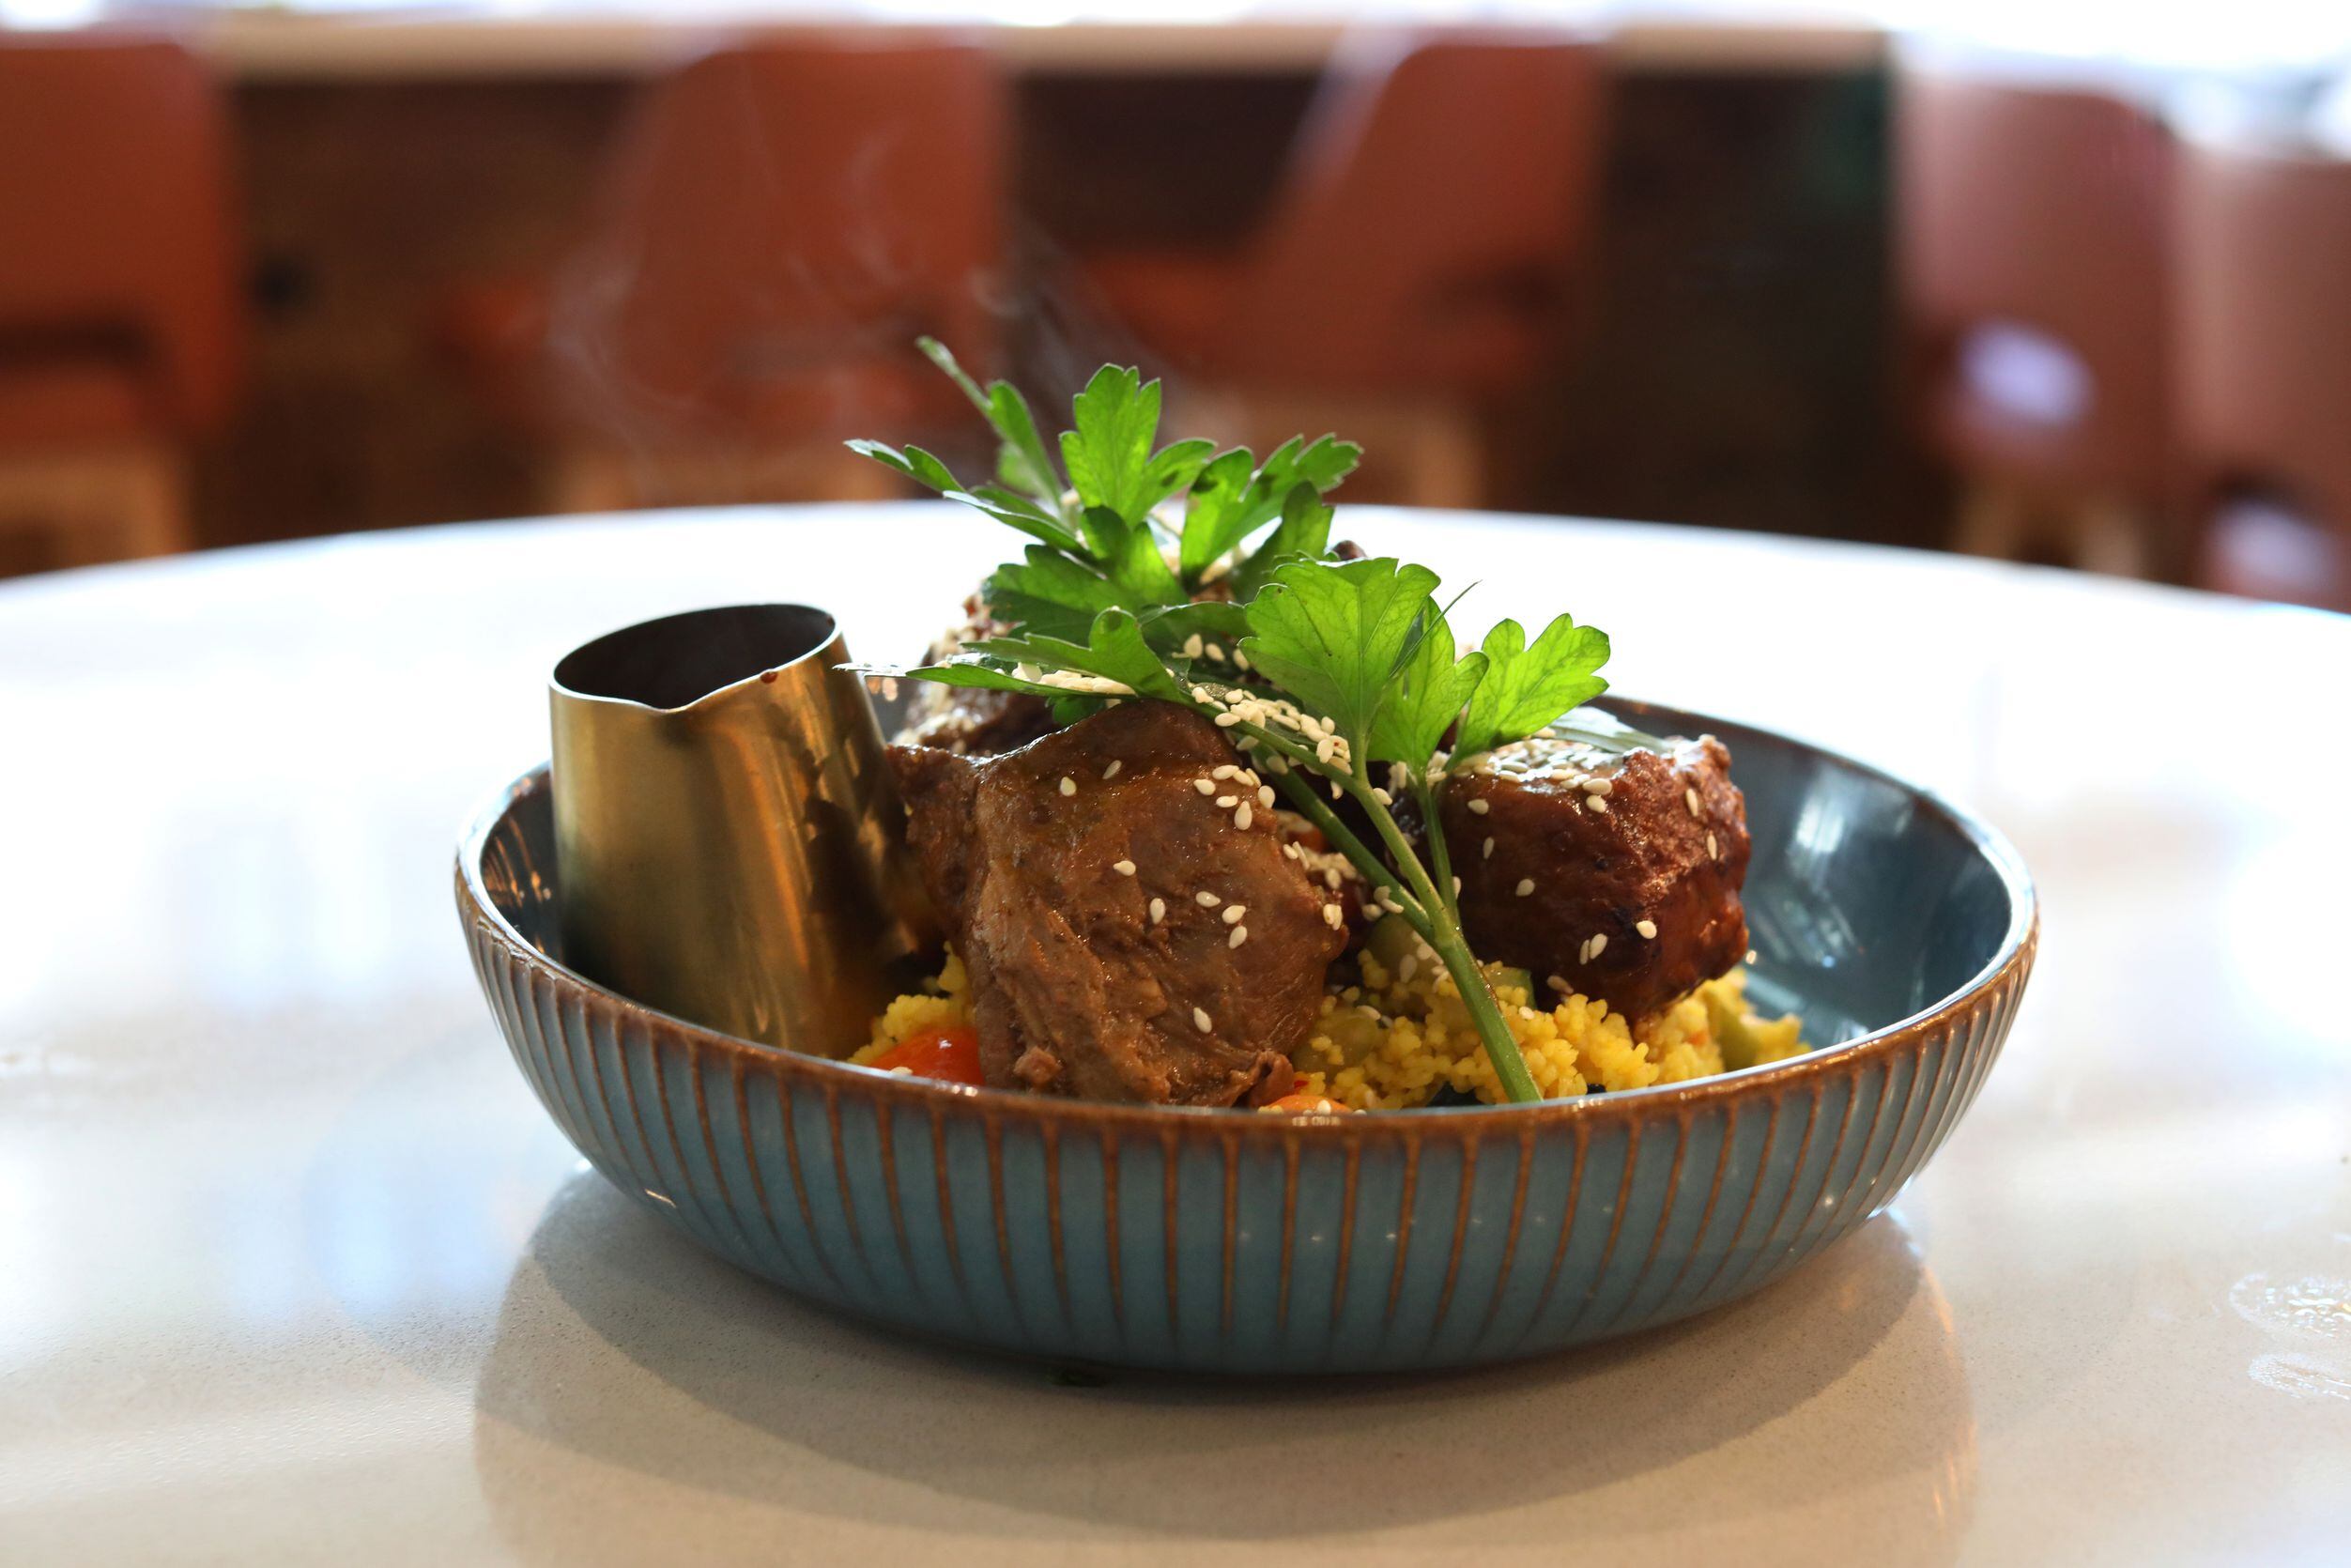 The Moroccan Lamb Couscous at Darna in Plano